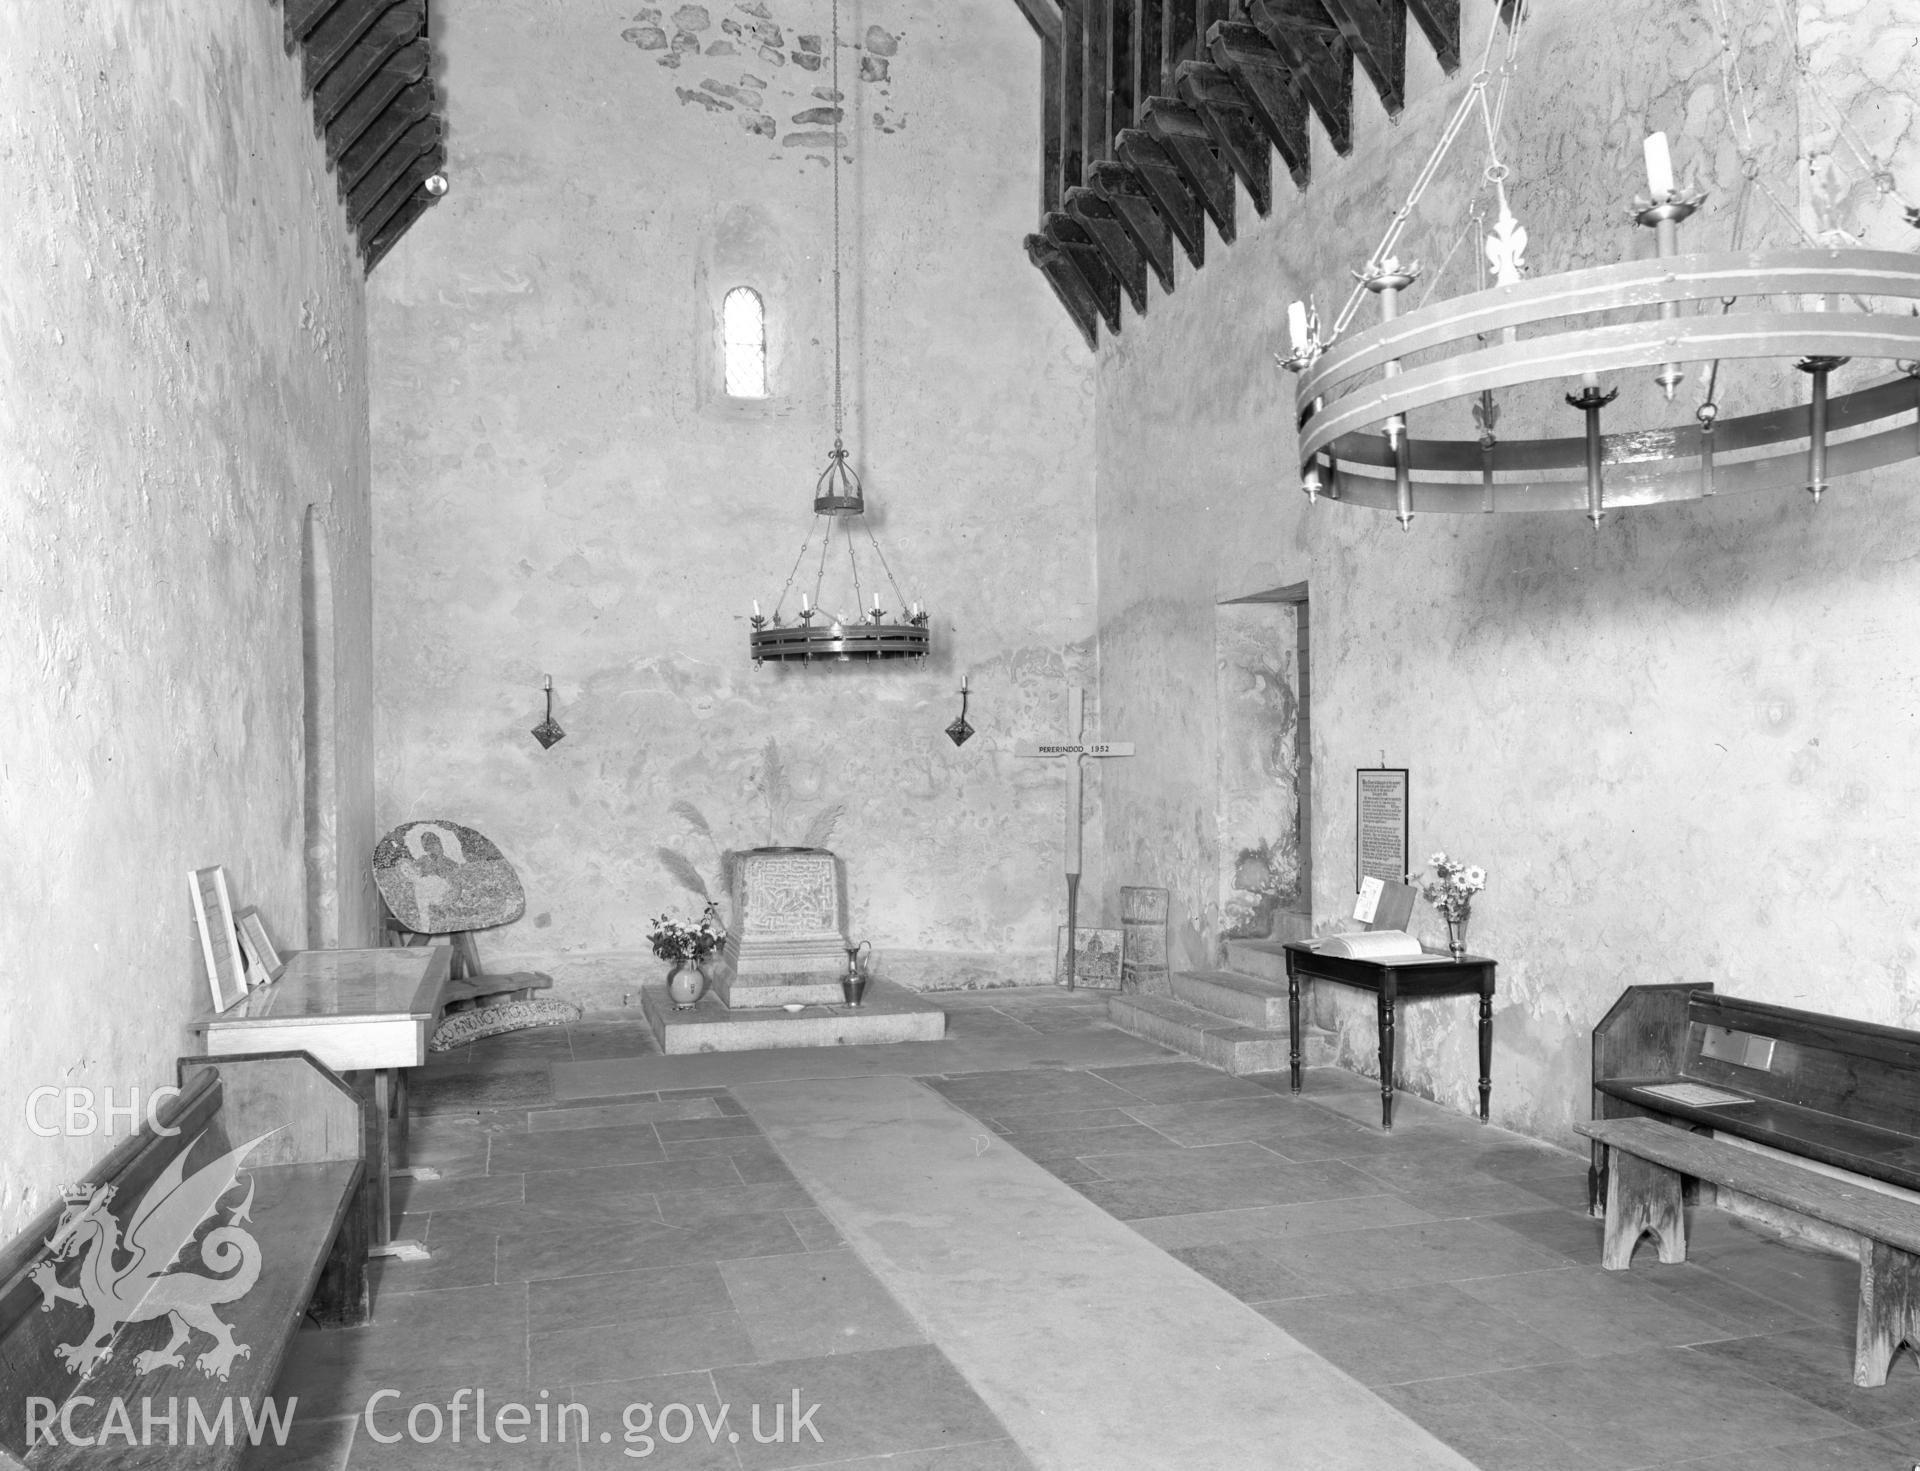 Digital copy of a black and white negative showing an interior view of Penmon priory taken 1976.